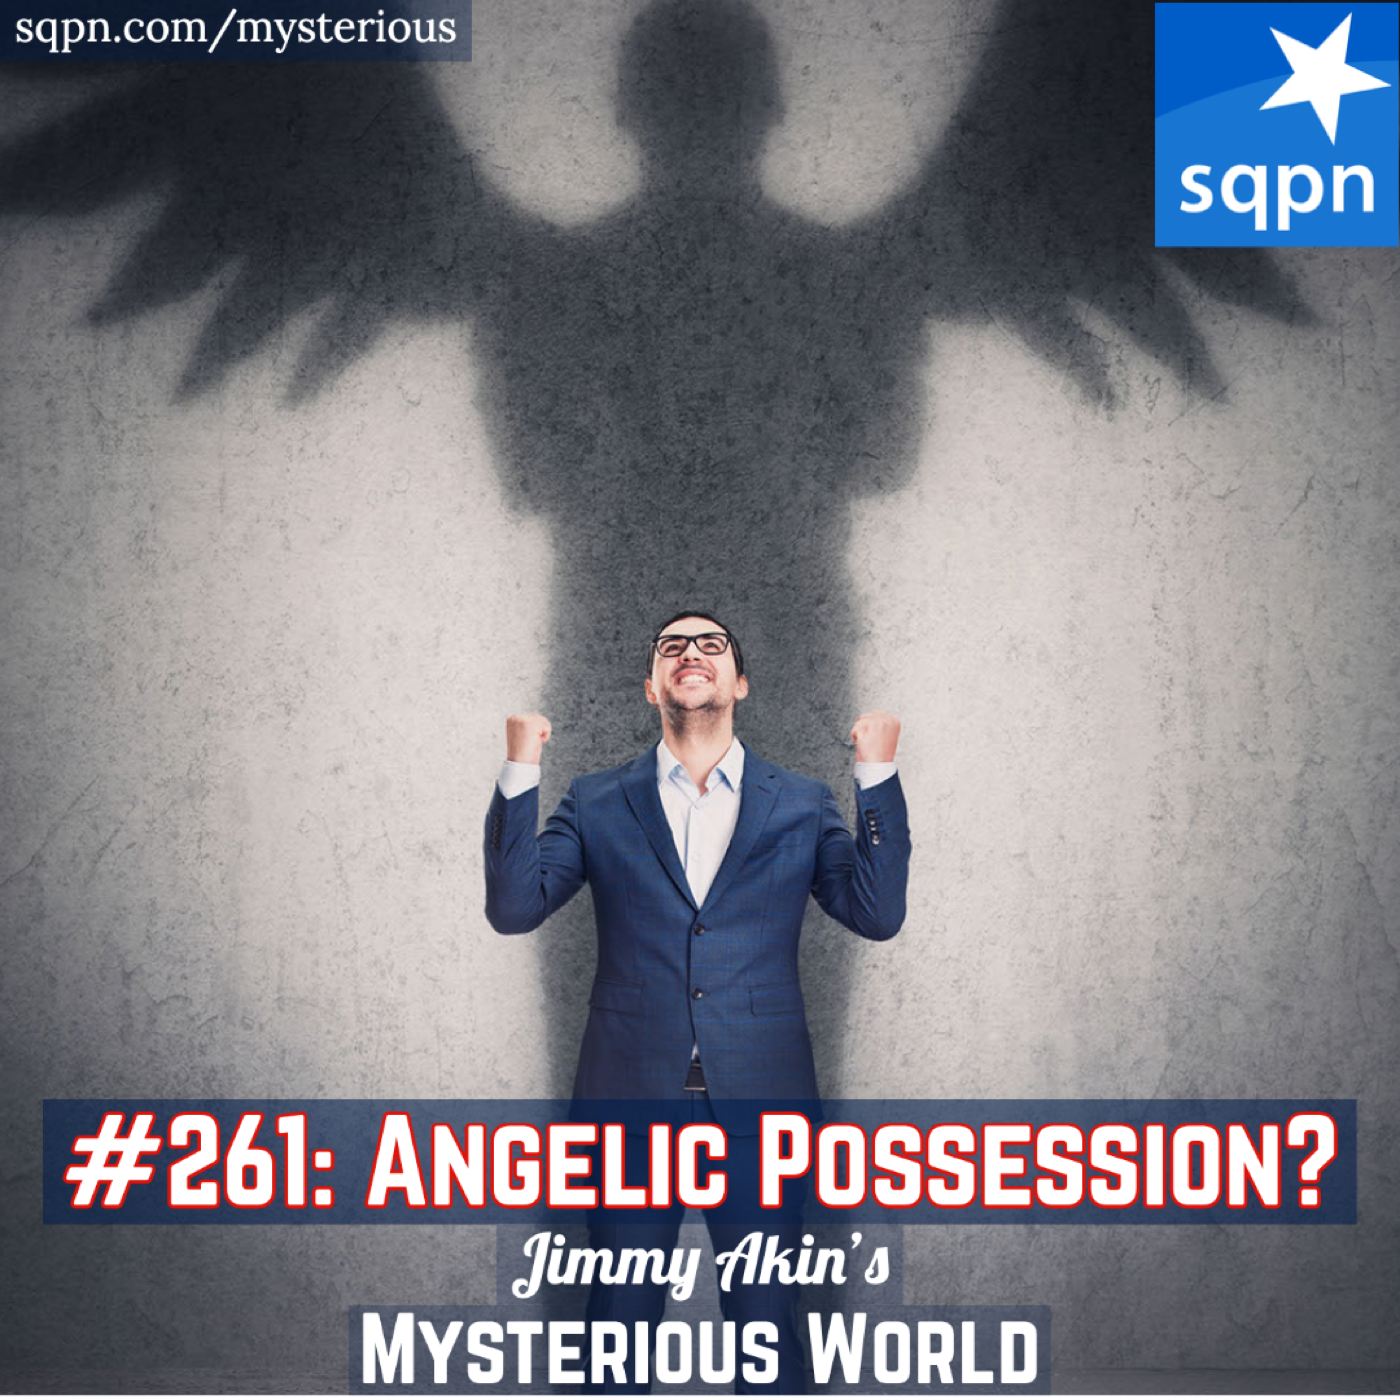 Angelic Possession (And More Patrons’ Questions!)